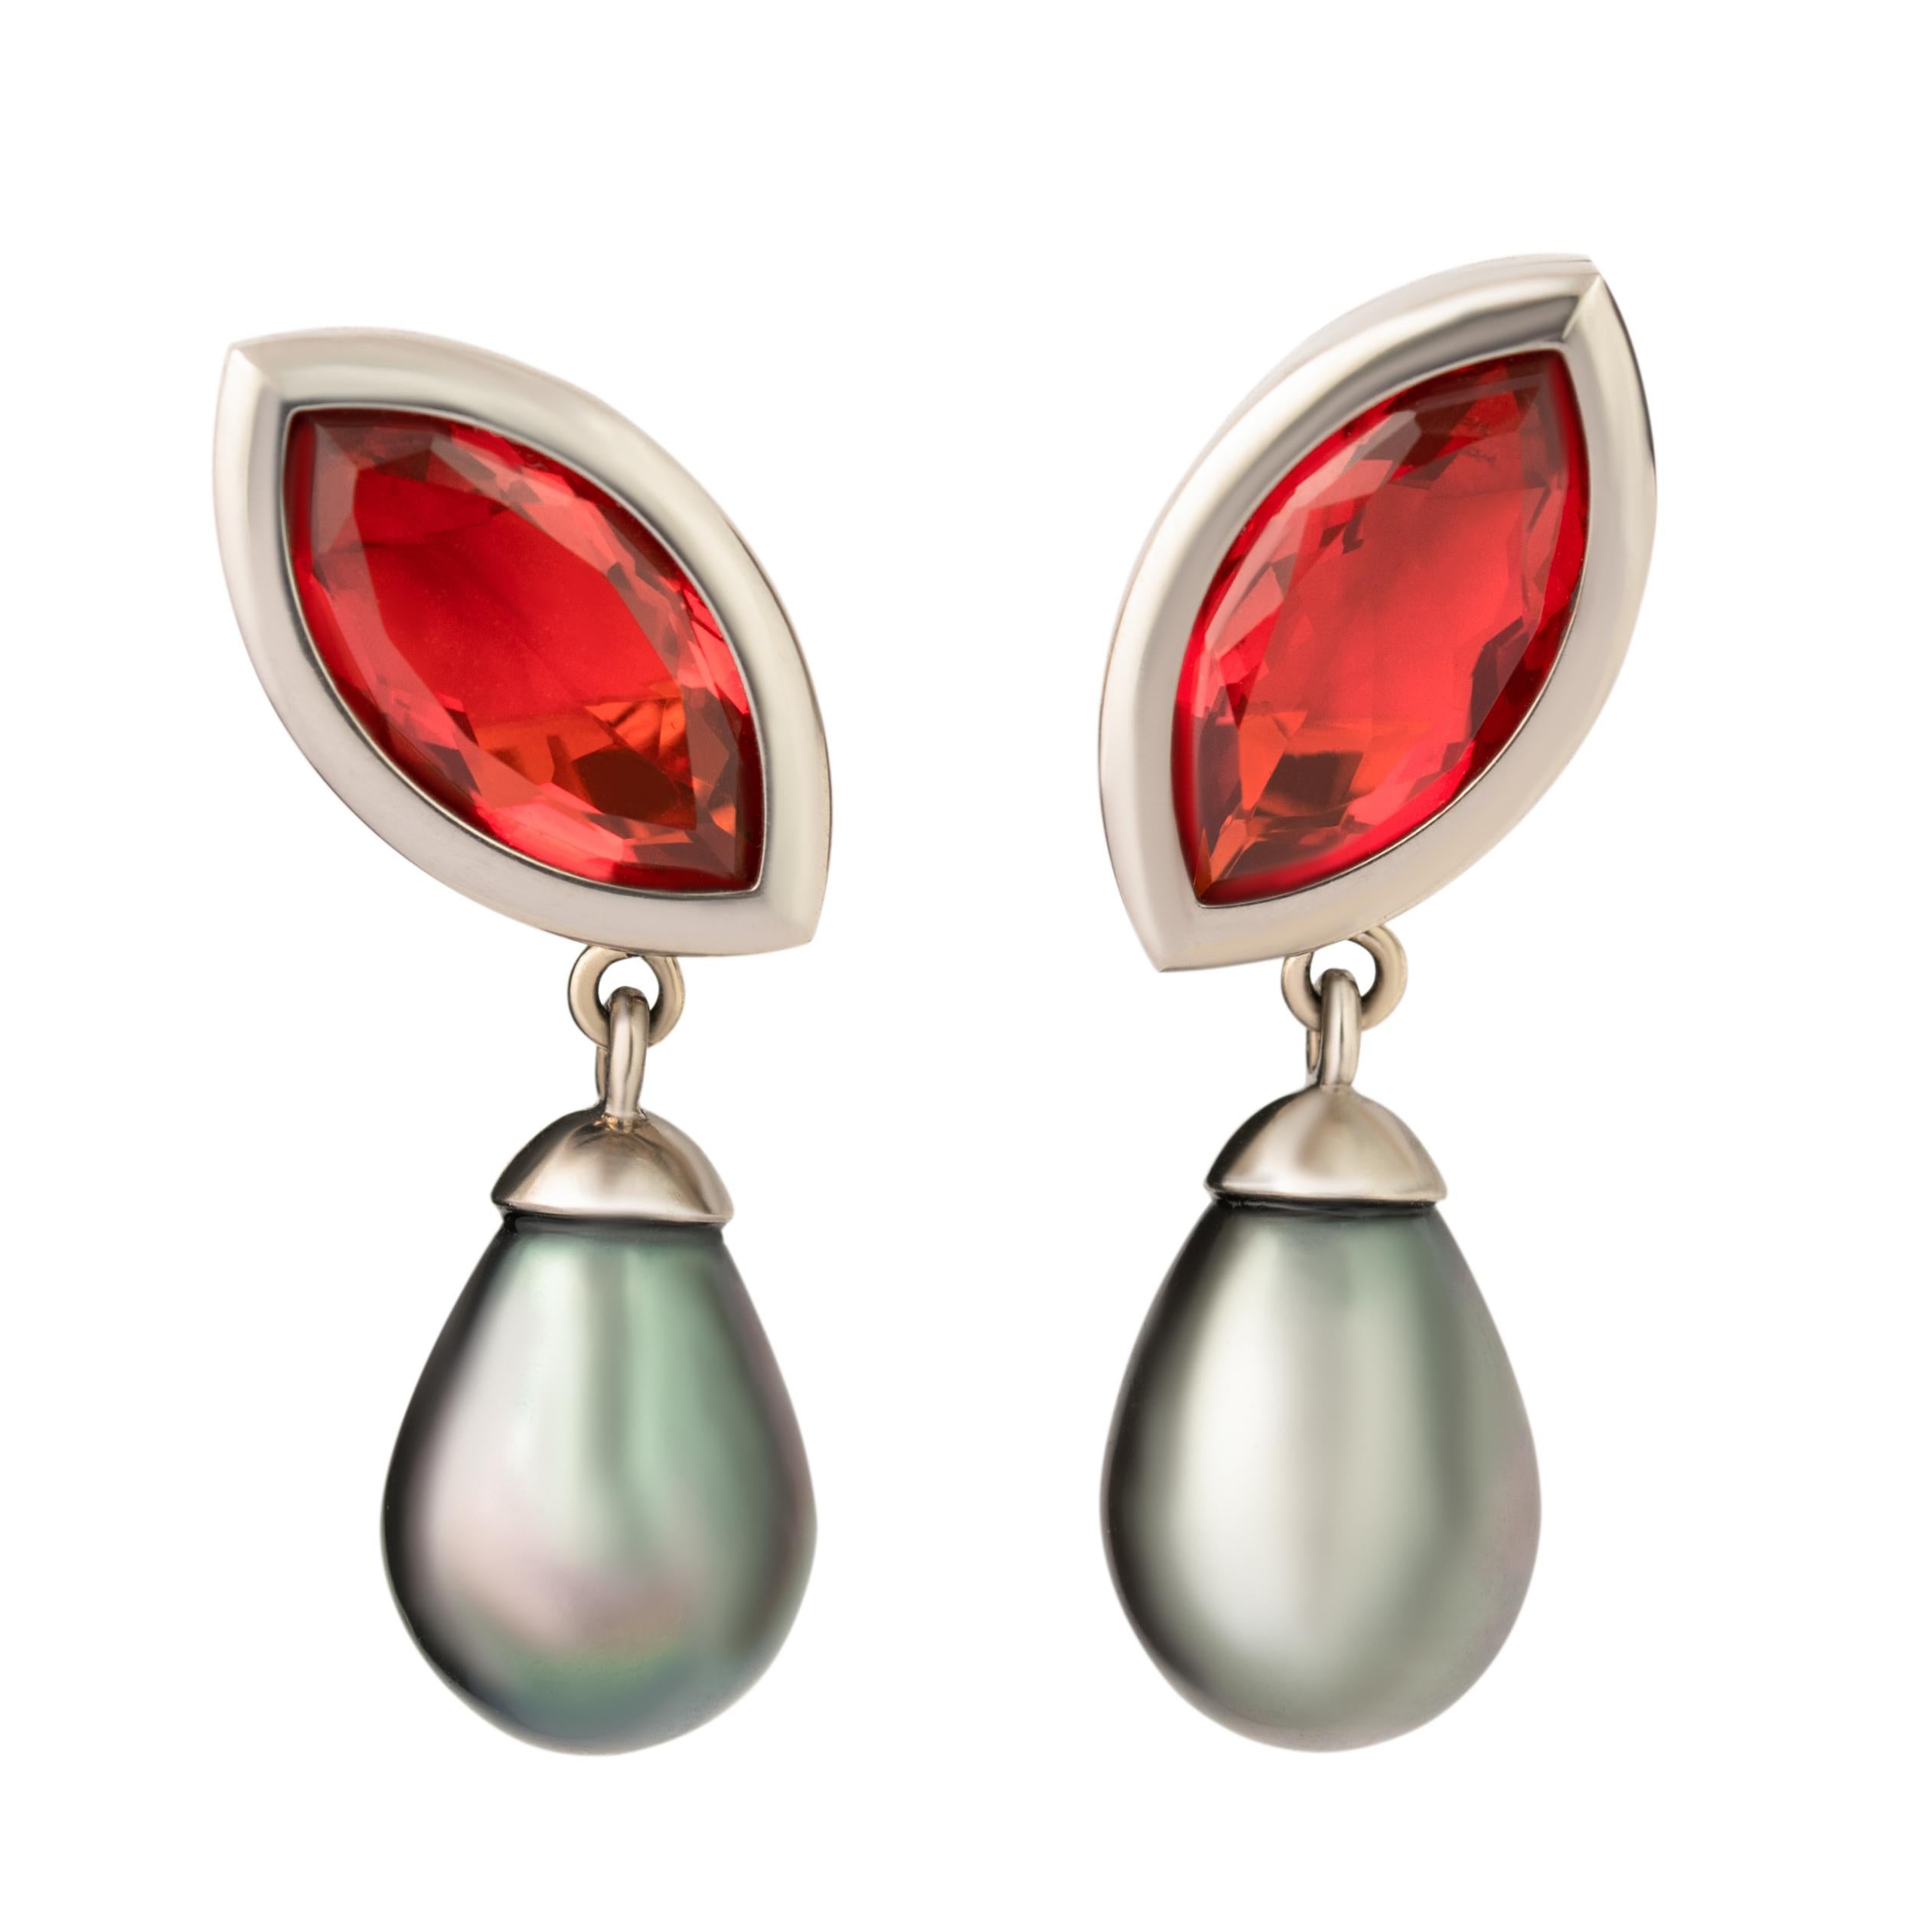 7.51 Carat Fire Opal Navettes Tahiti-Pearl Drops White Gold Earrings For Sale